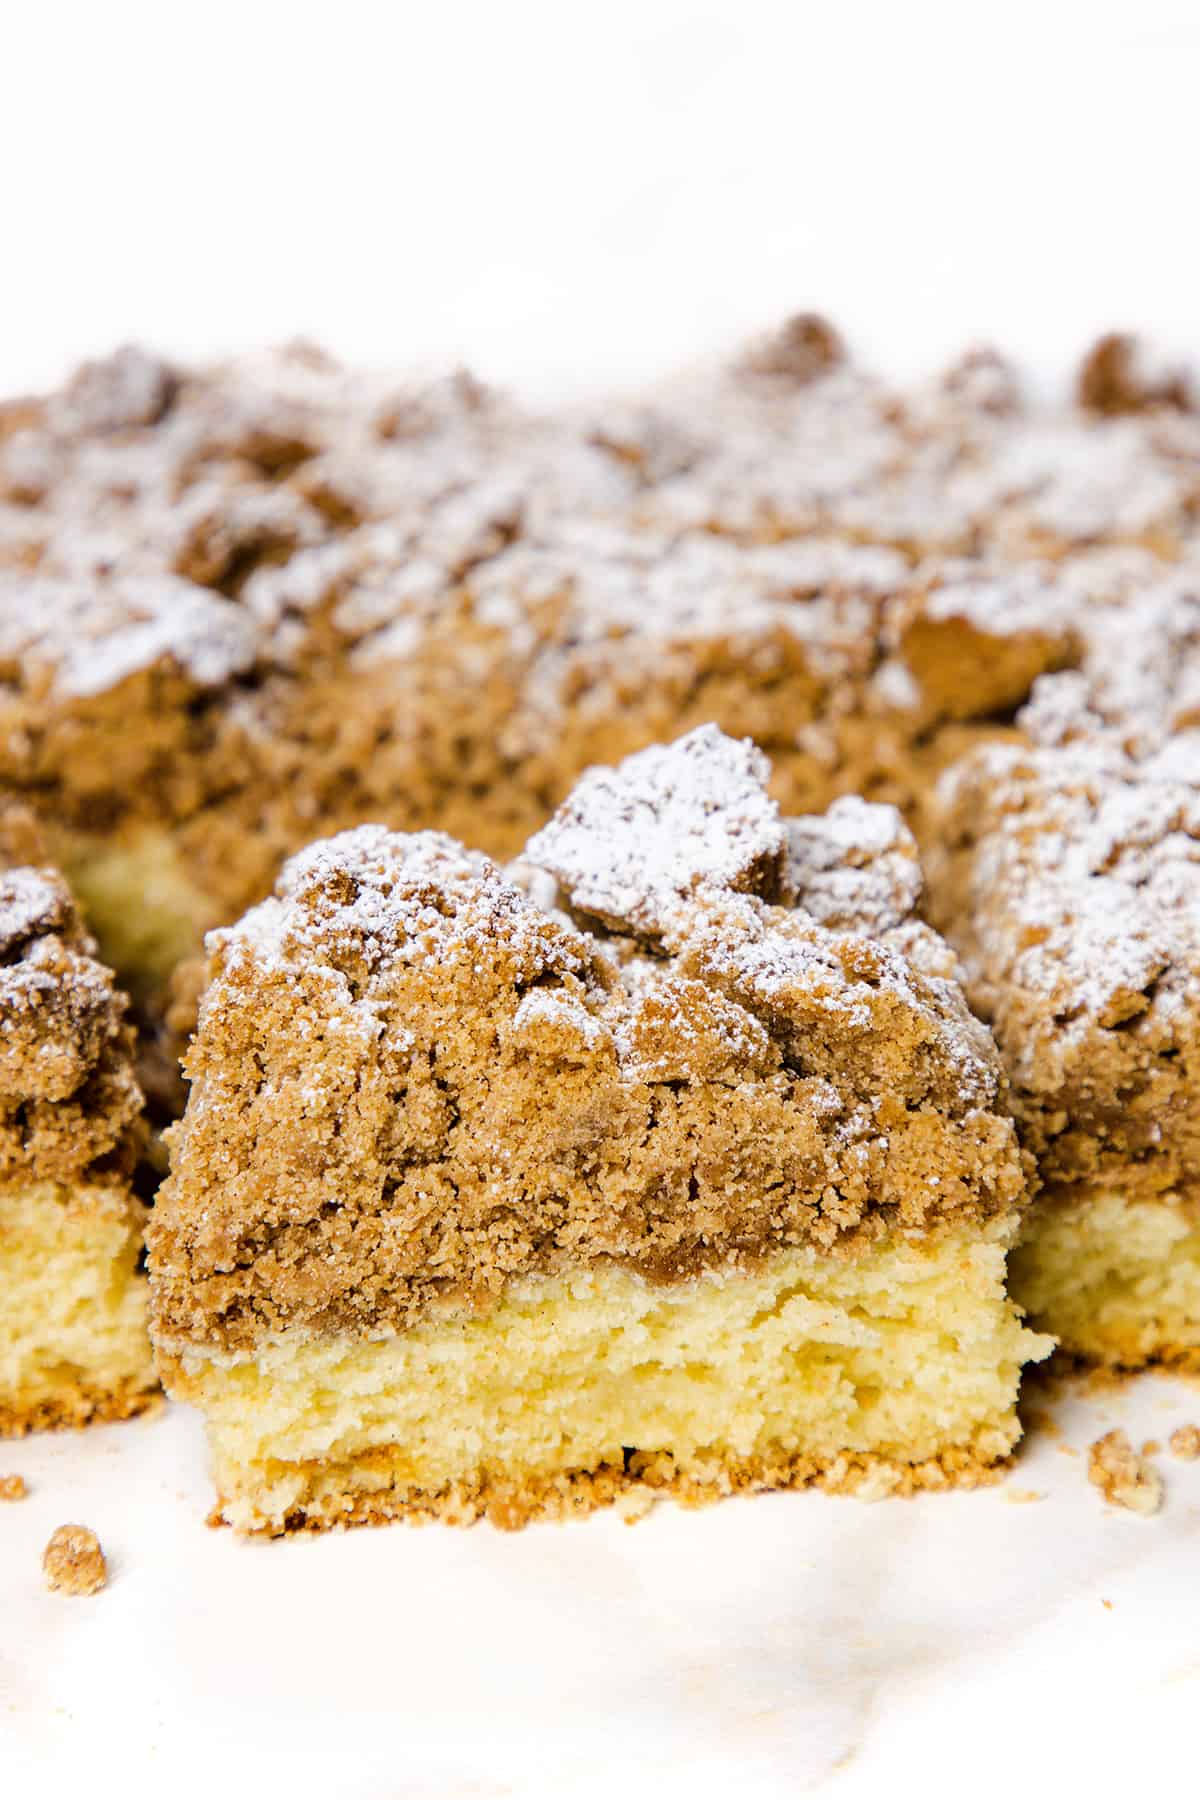 12 Coffee Cakes subscribe & save - Steiner's Coffee Cake of New York